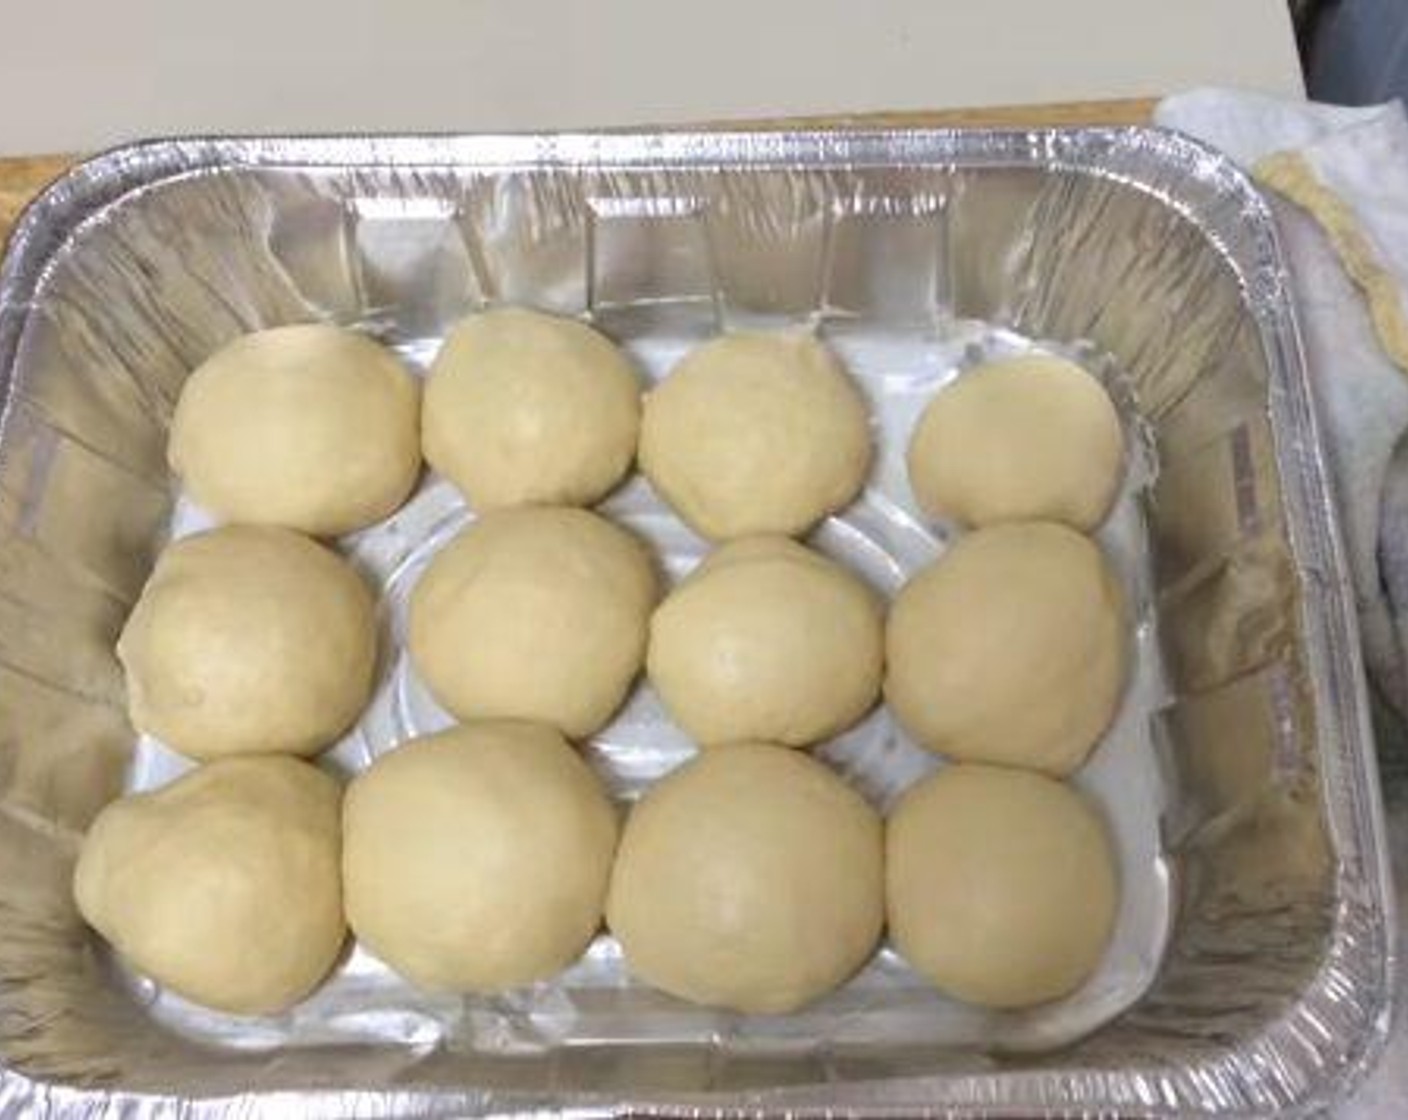 step 4 Form the dough into an elongated bread shape, and cut it into 12 equal pieces. Form each piece into a ball shape, and place it into a baking dish. Cover the buns with a towel, and place them in a warm place for about an hour.